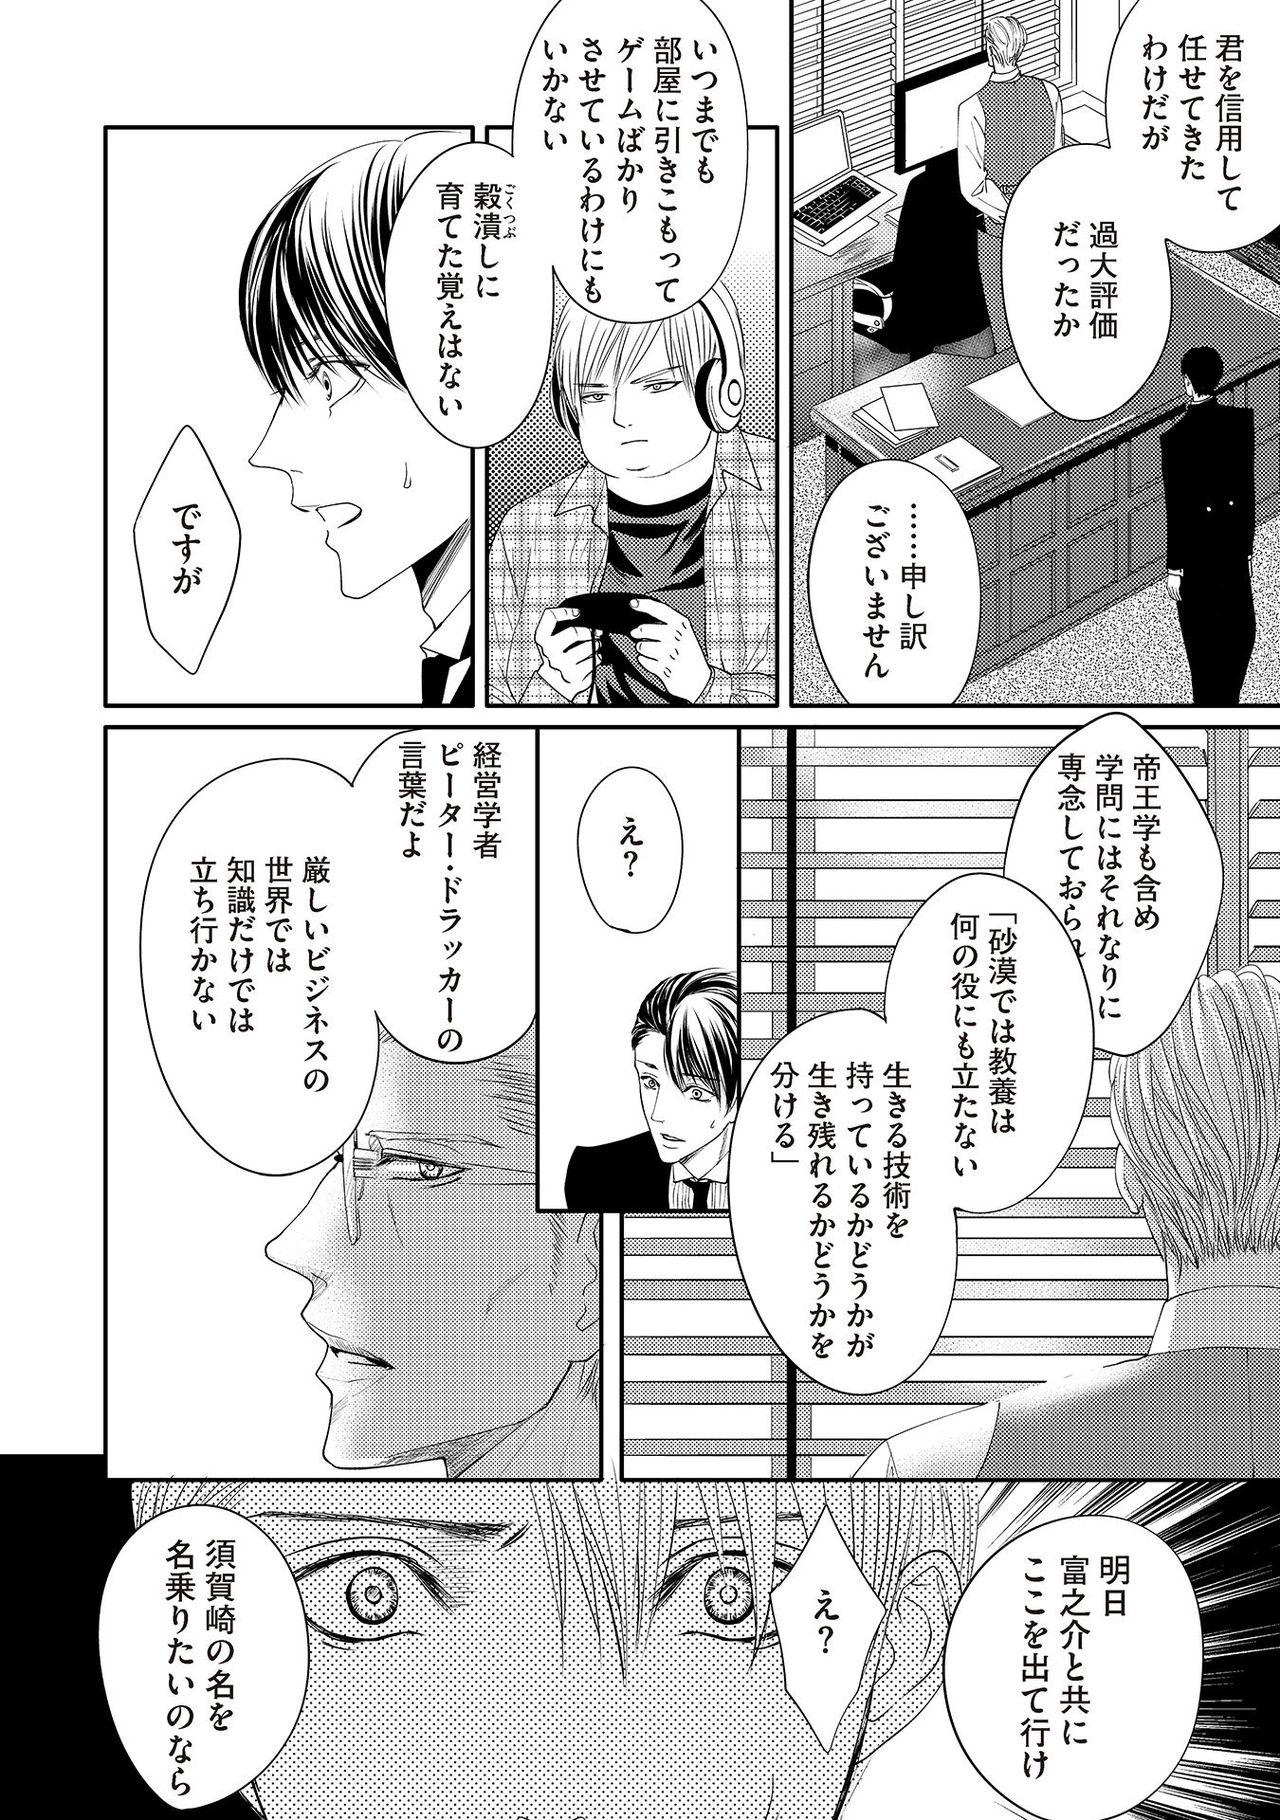 Tgirl Aa Bocchama...! - Oh! My Mister...! Tease - Page 8